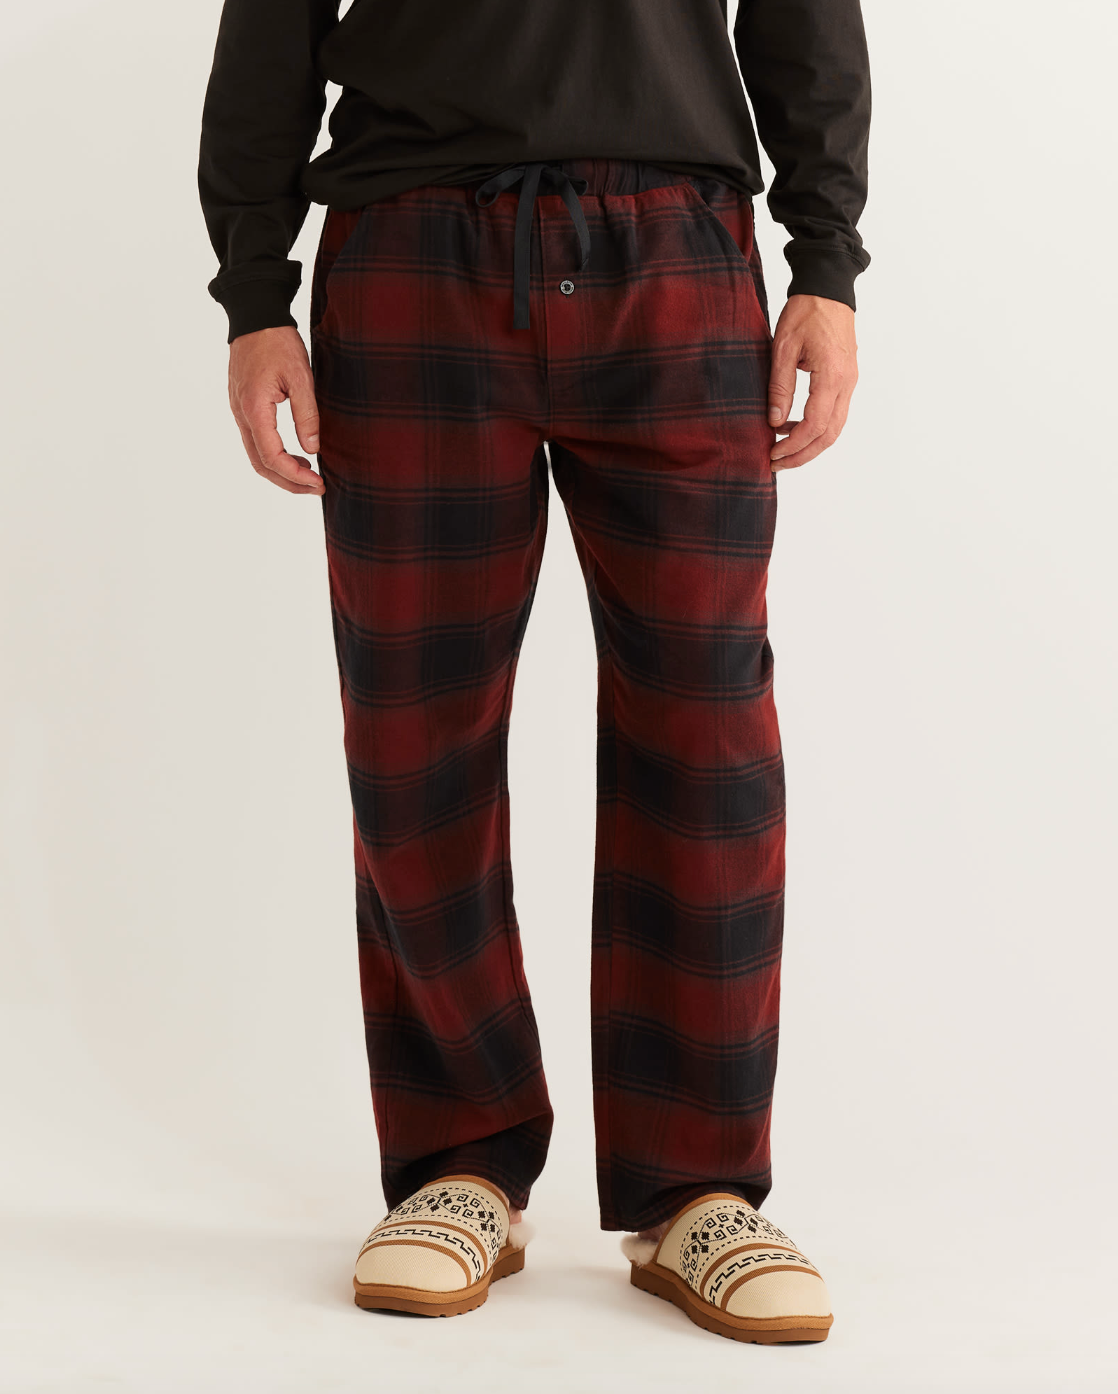 Black And Gray Checkered Pajama Pants – Body By RR